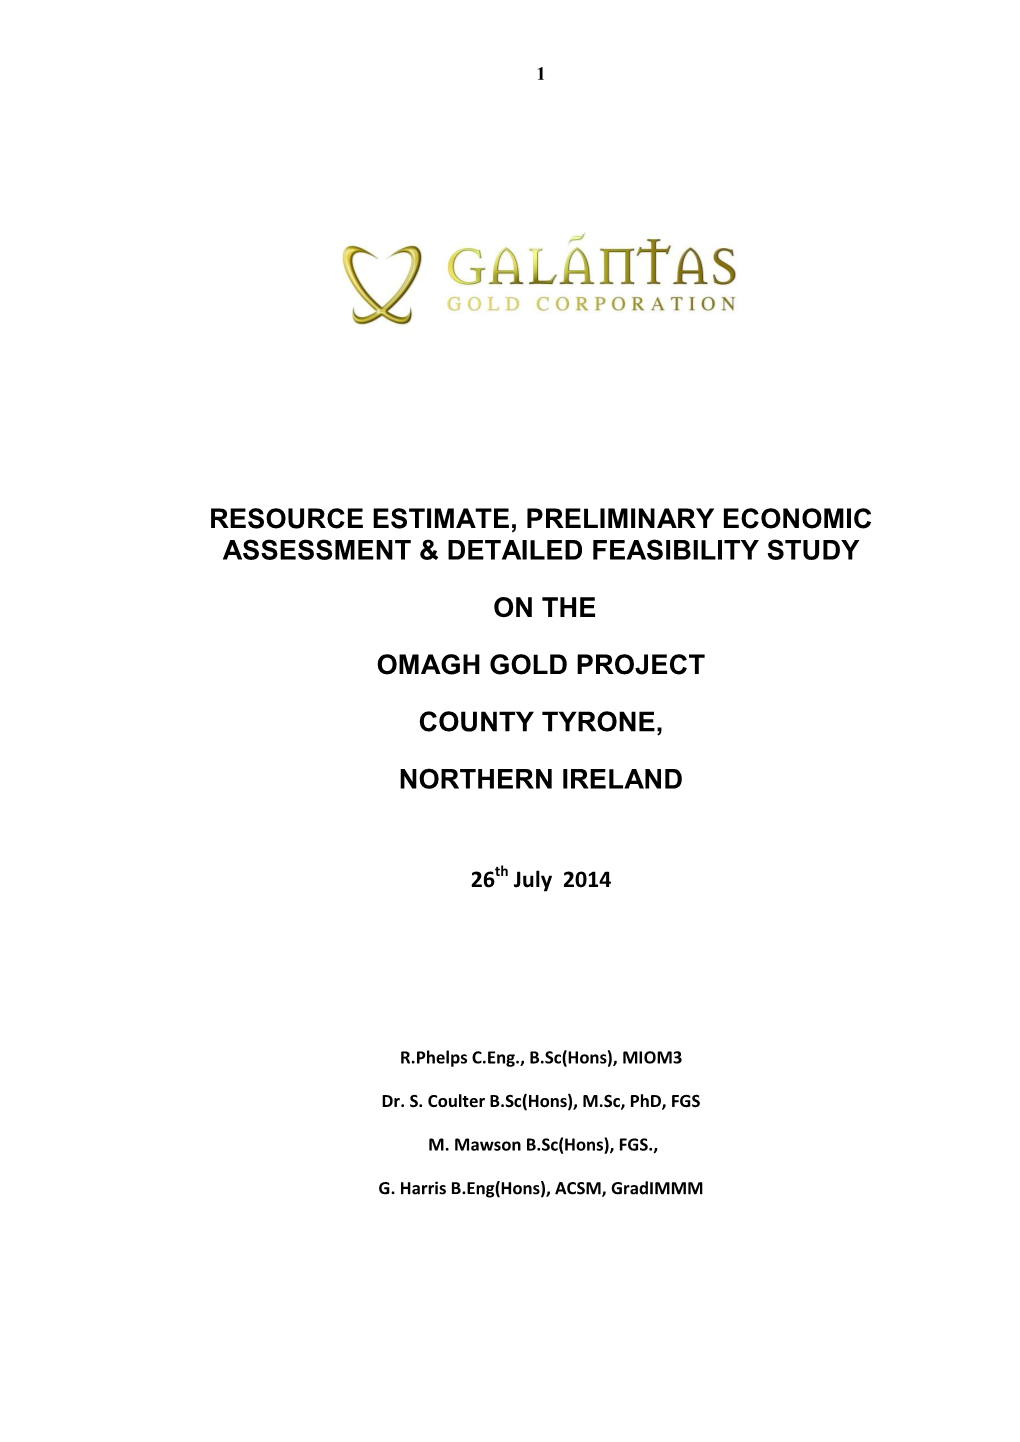 Resource Estimate, Preliminary Economic Assessment & Detailed Feasibility Study